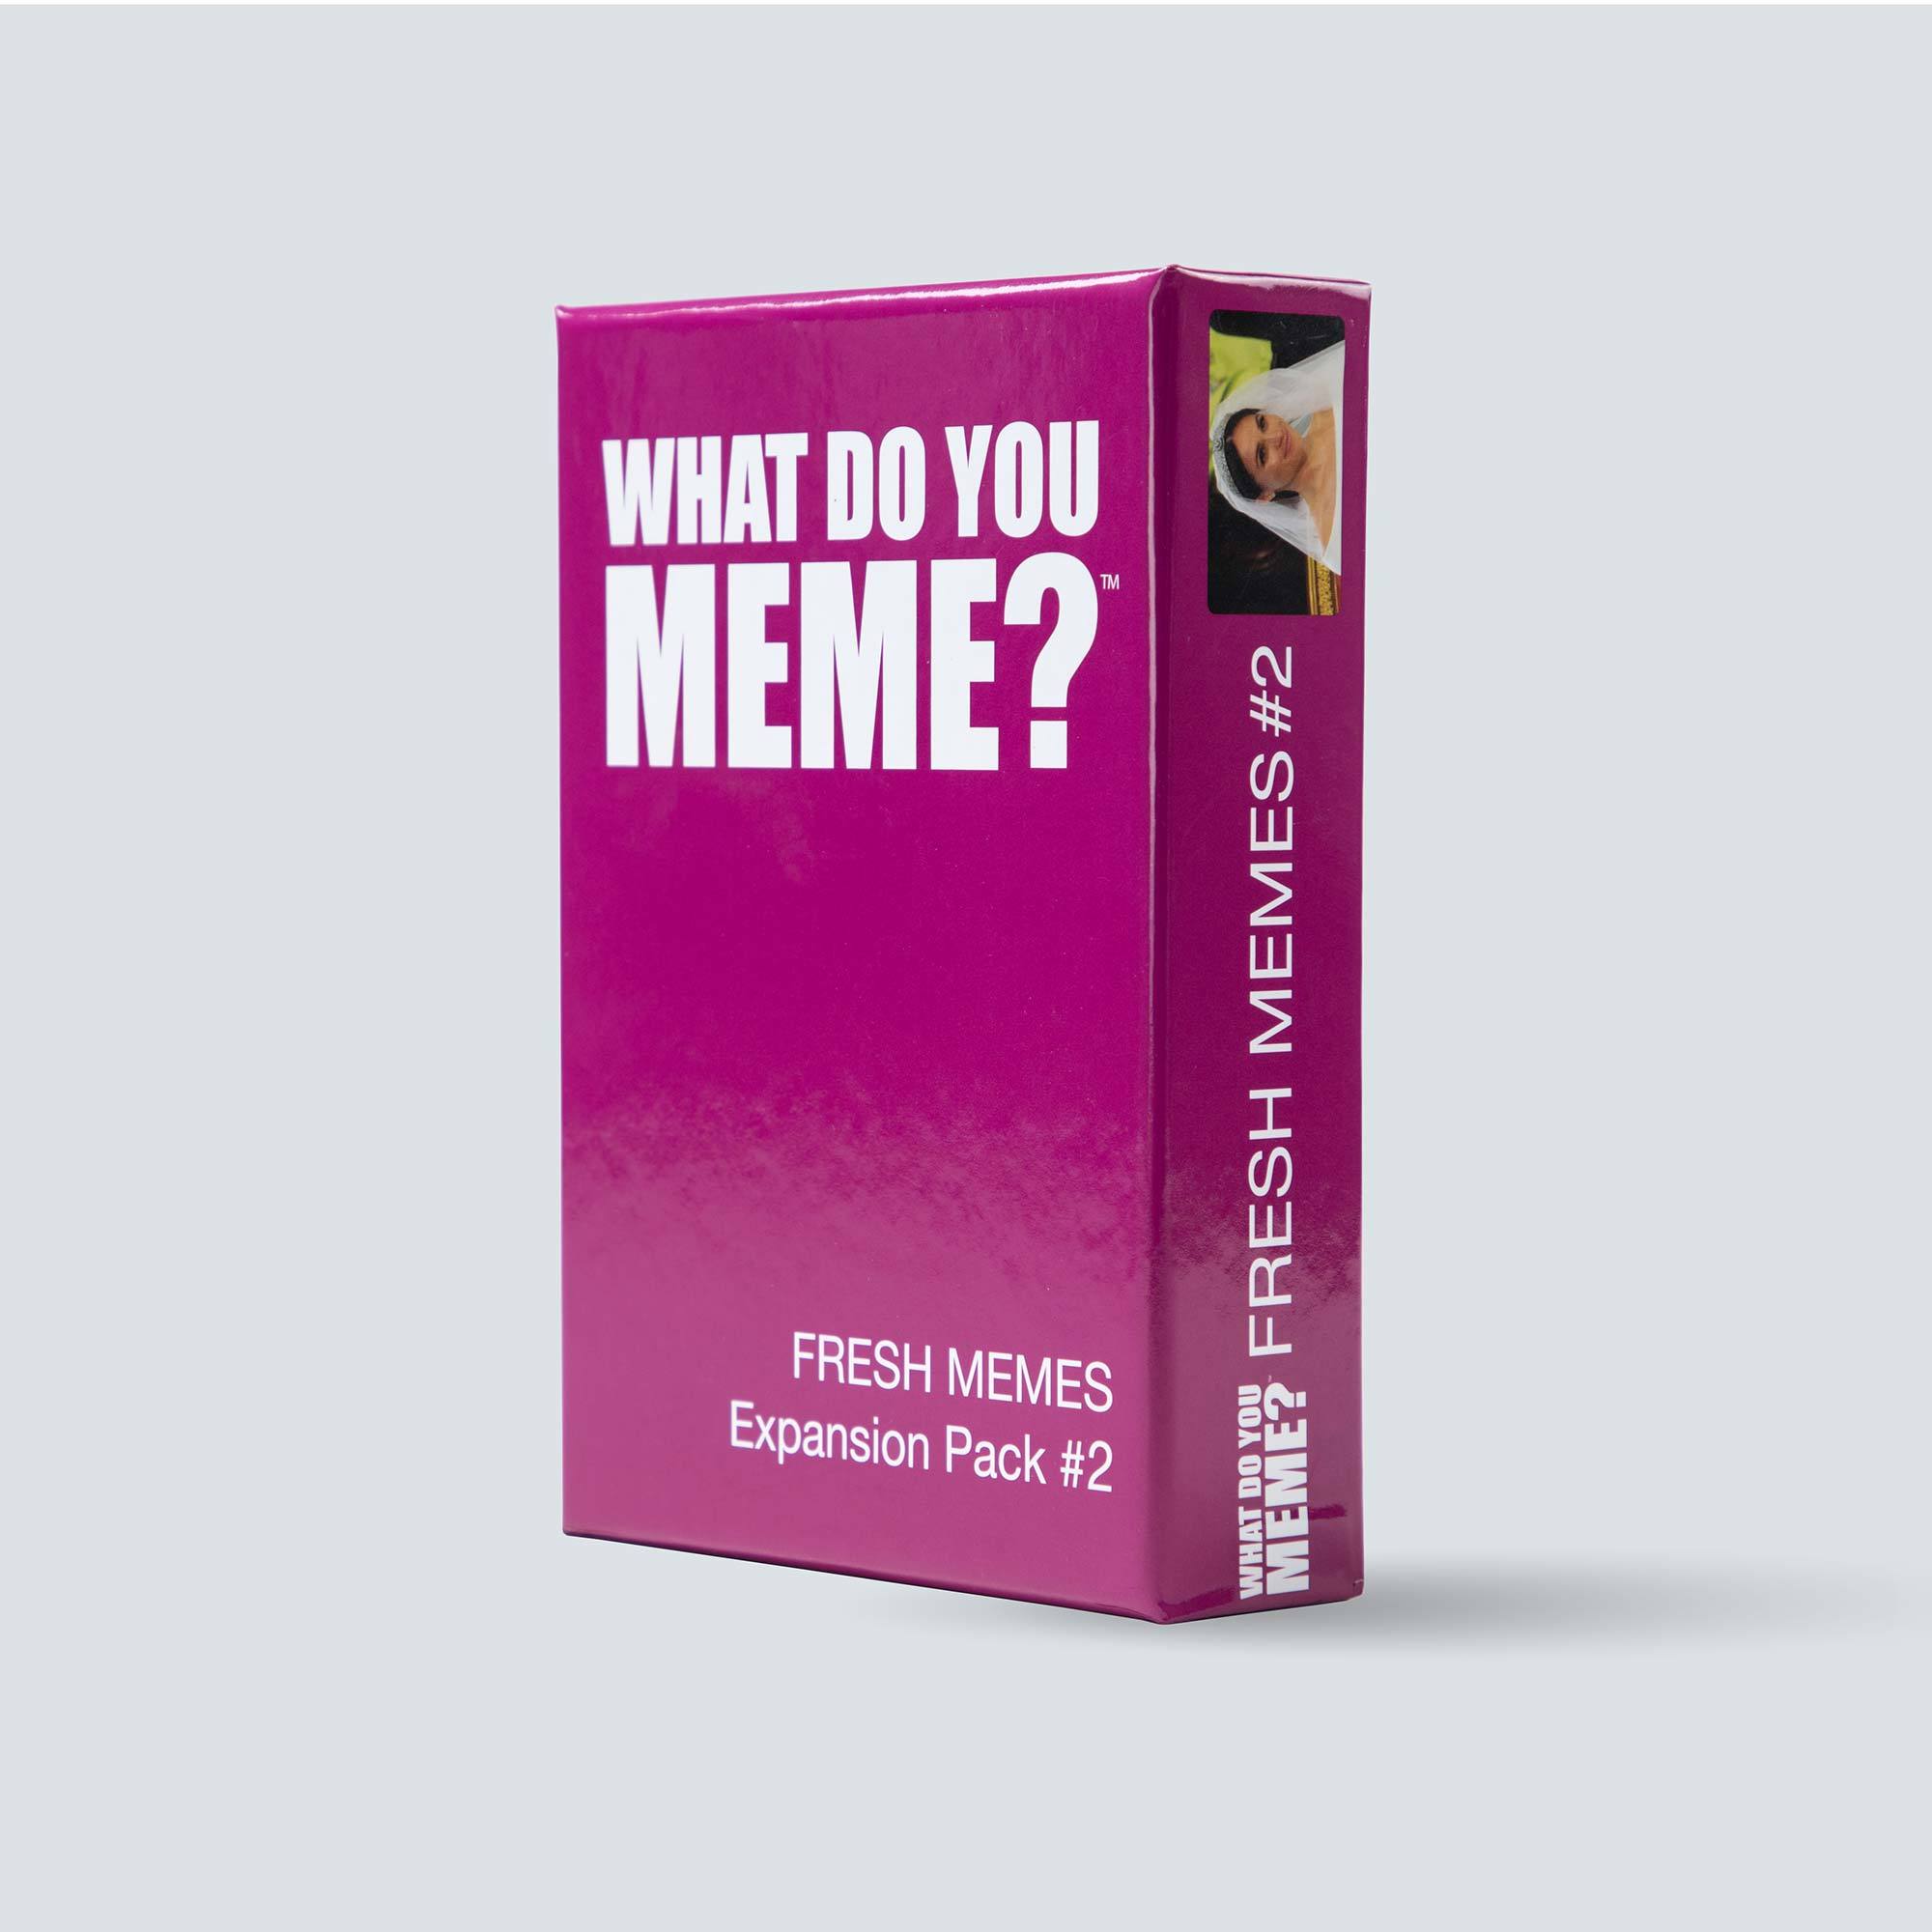 fresh-memes-2-expansion-pack-game-box-and-game-play-02-what-do-you-meme-by-relatable